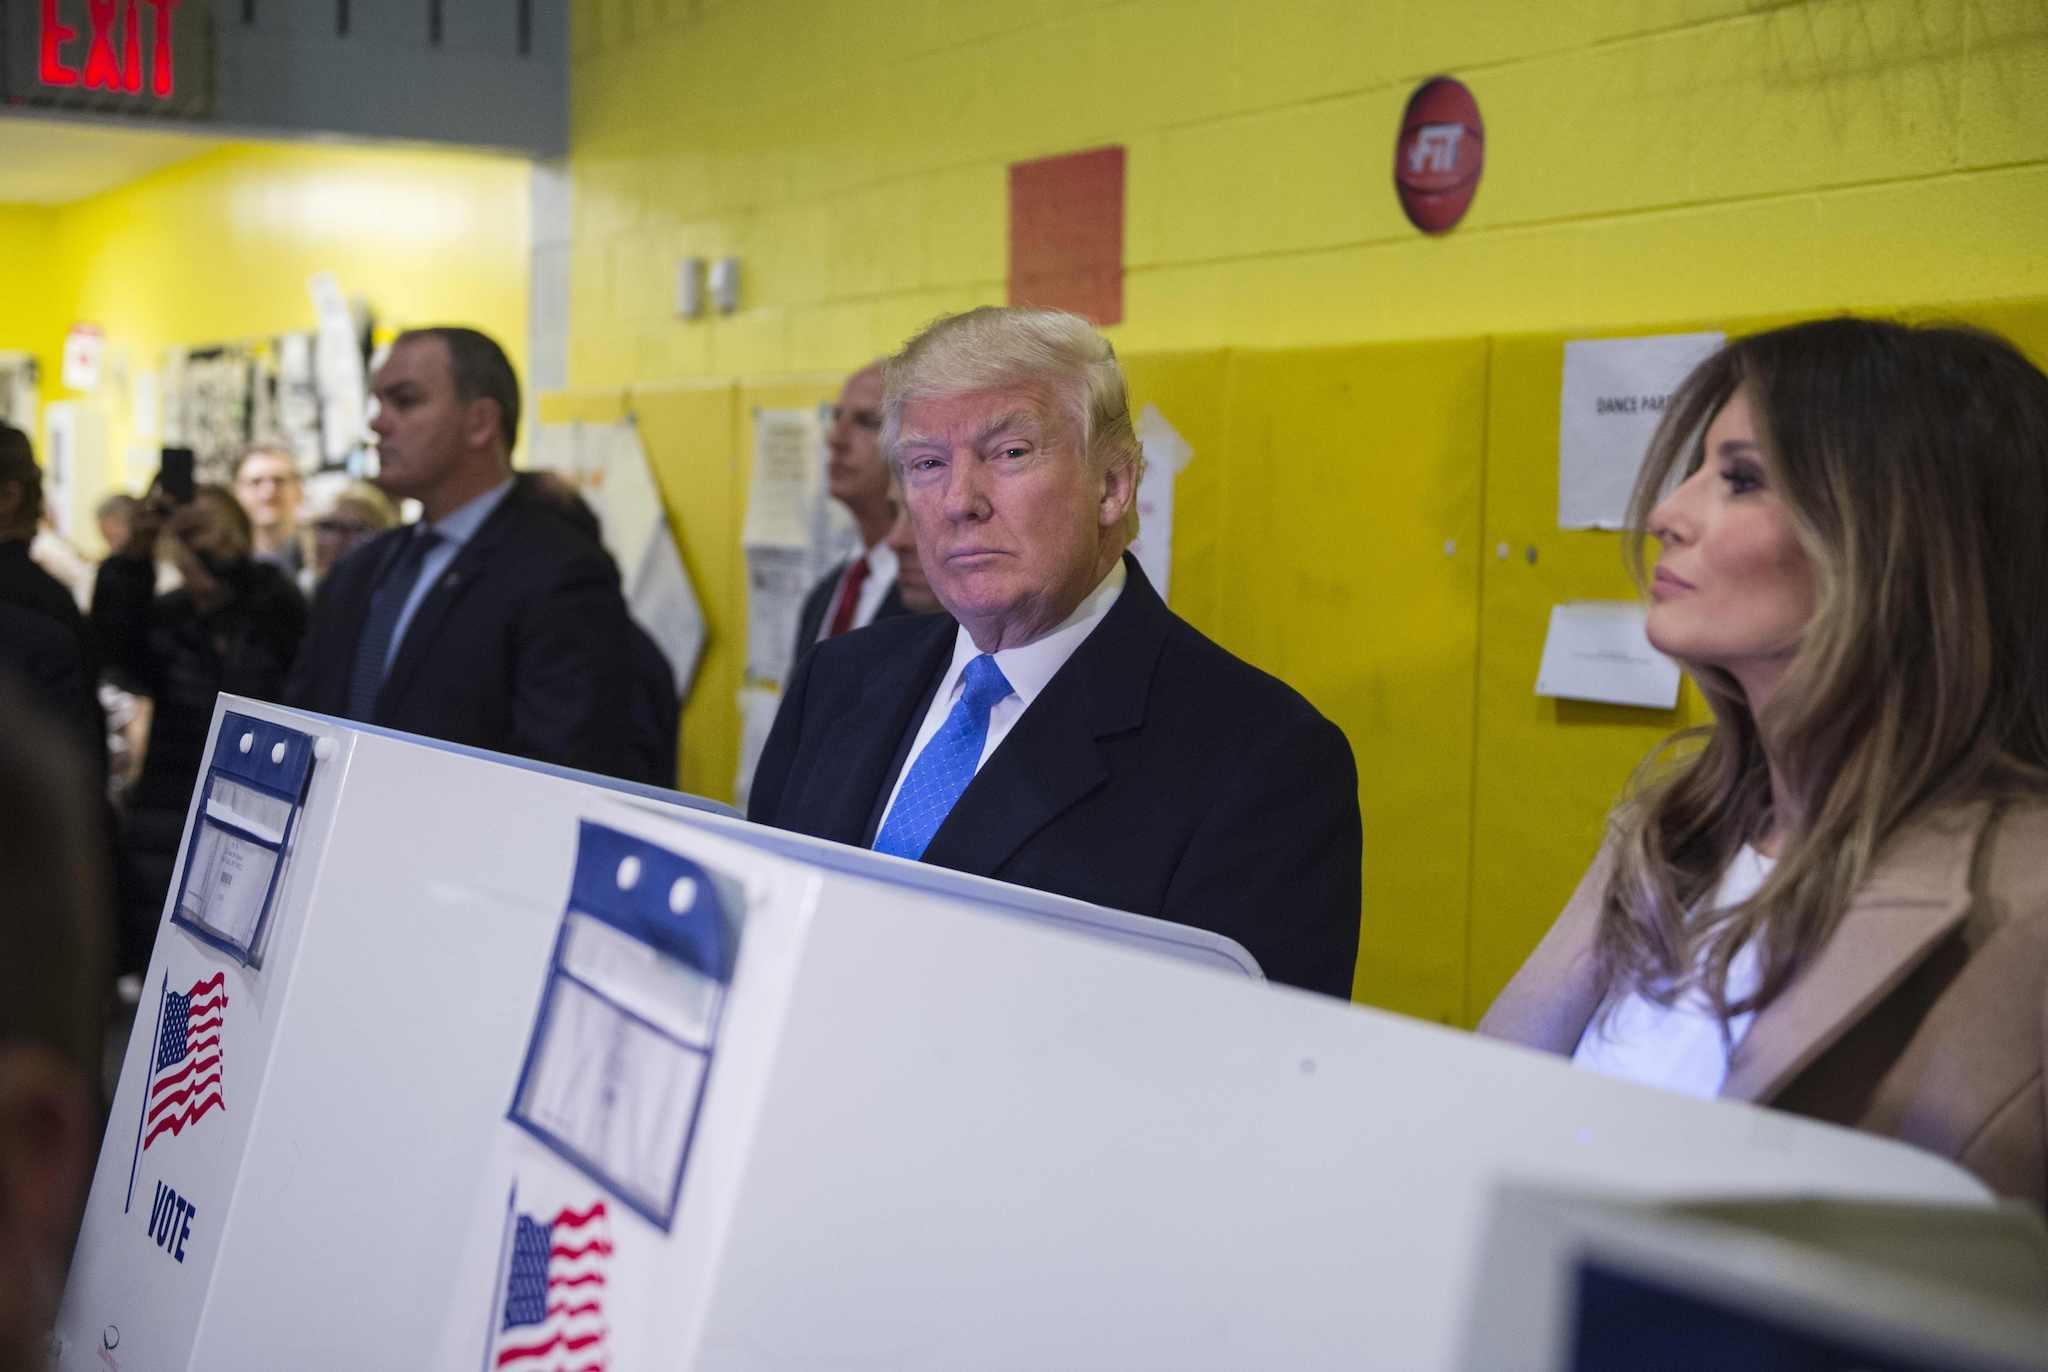 Republican presidential nominee Donald Trump(2nd R) and his wife Melania fill out their ballots at a polling station in a school during the 2016 presidential elections